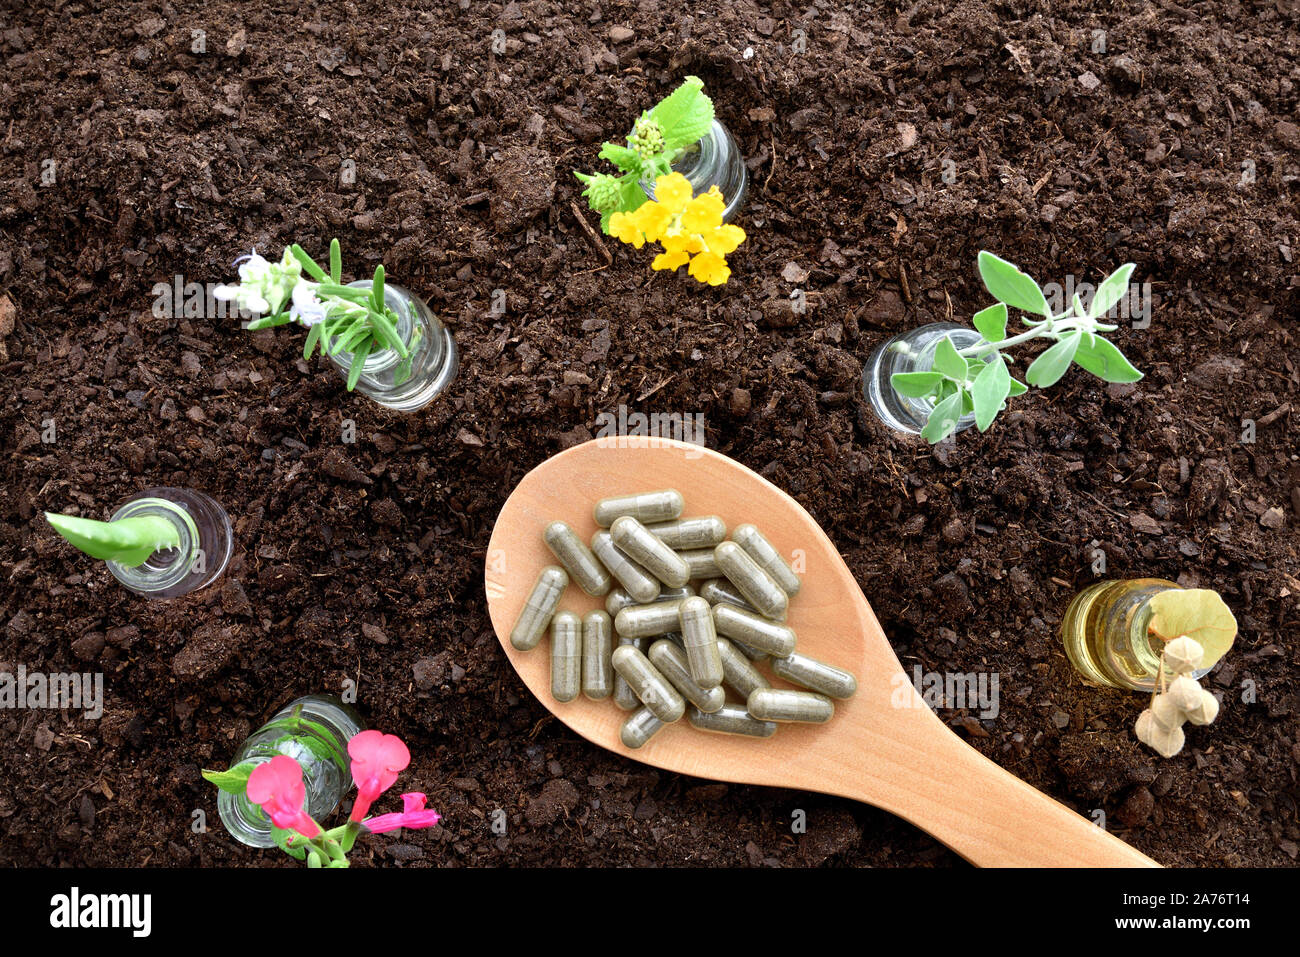 Jars with plants inside and spoon with capsules on soil. Alternative natural medicine concept. Top view. Horizontal composition. Stock Photo